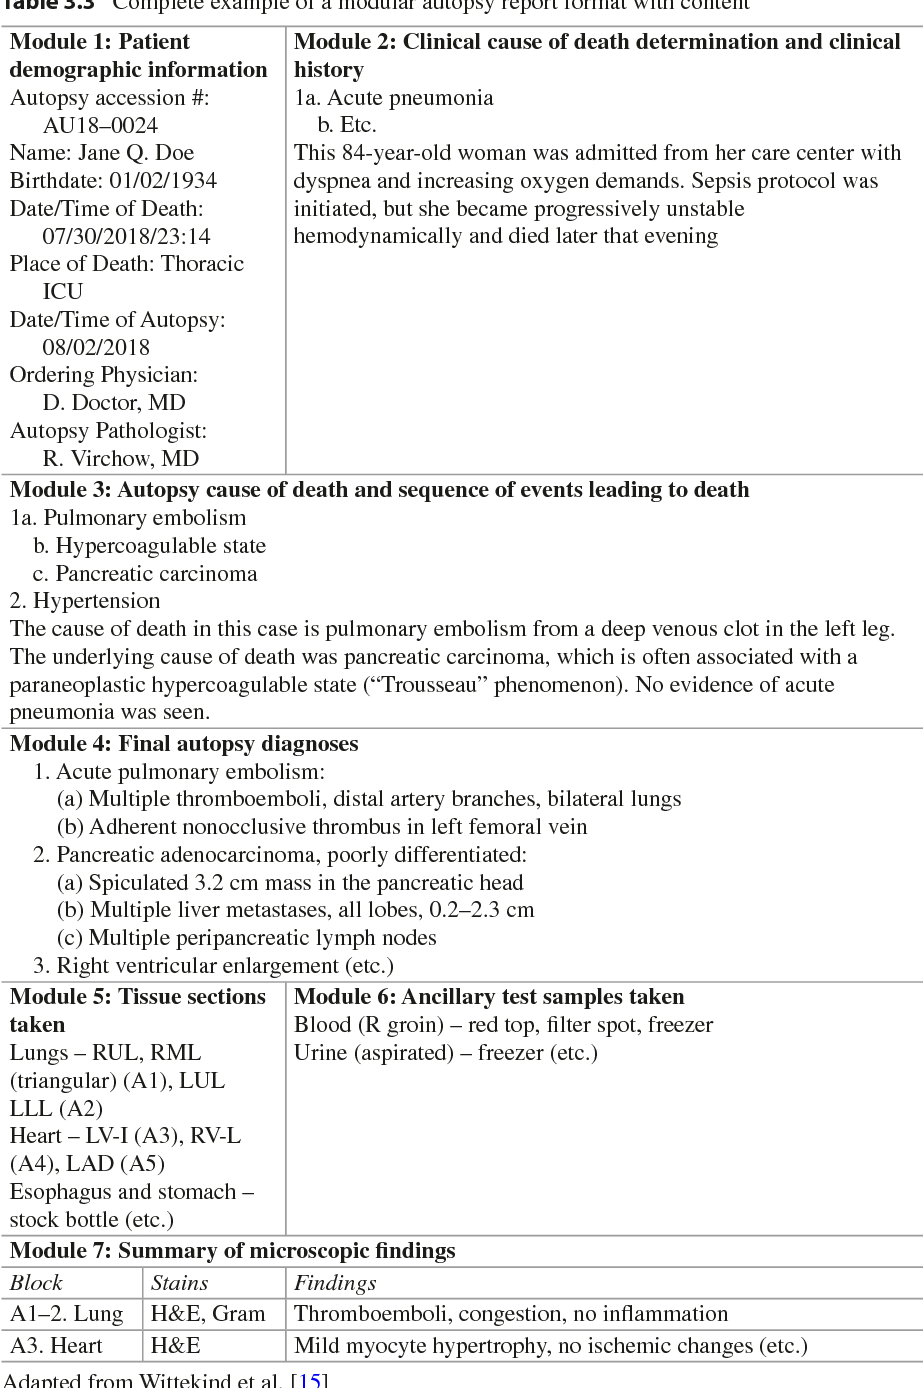 Table 3.3 From Autopsy In The 21St Century | Semantic Scholar For Autopsy Report Template